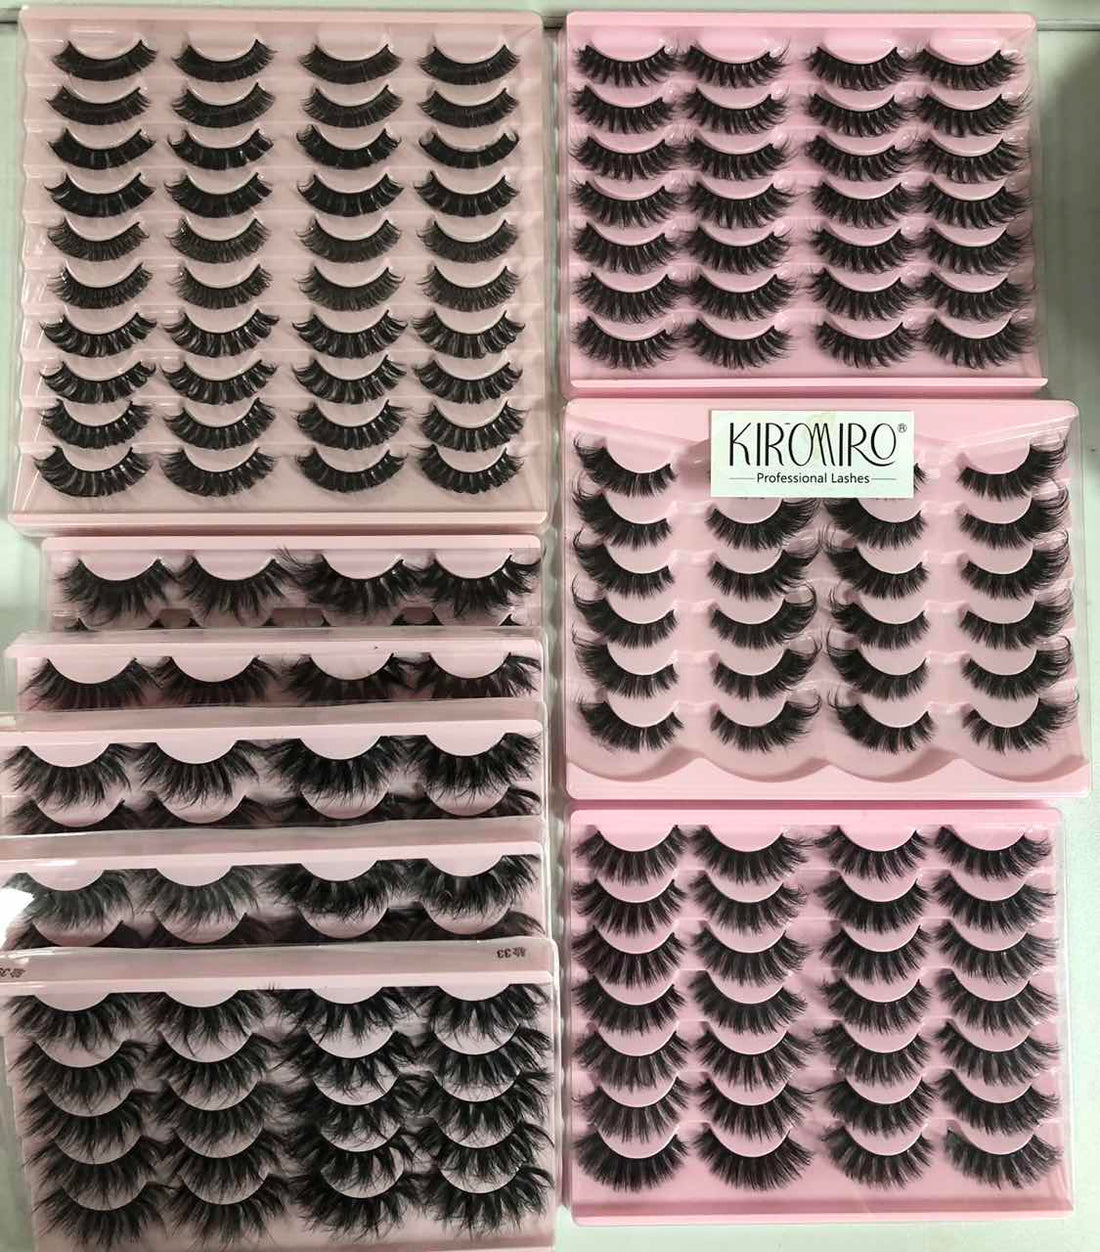 15 packs of lashes